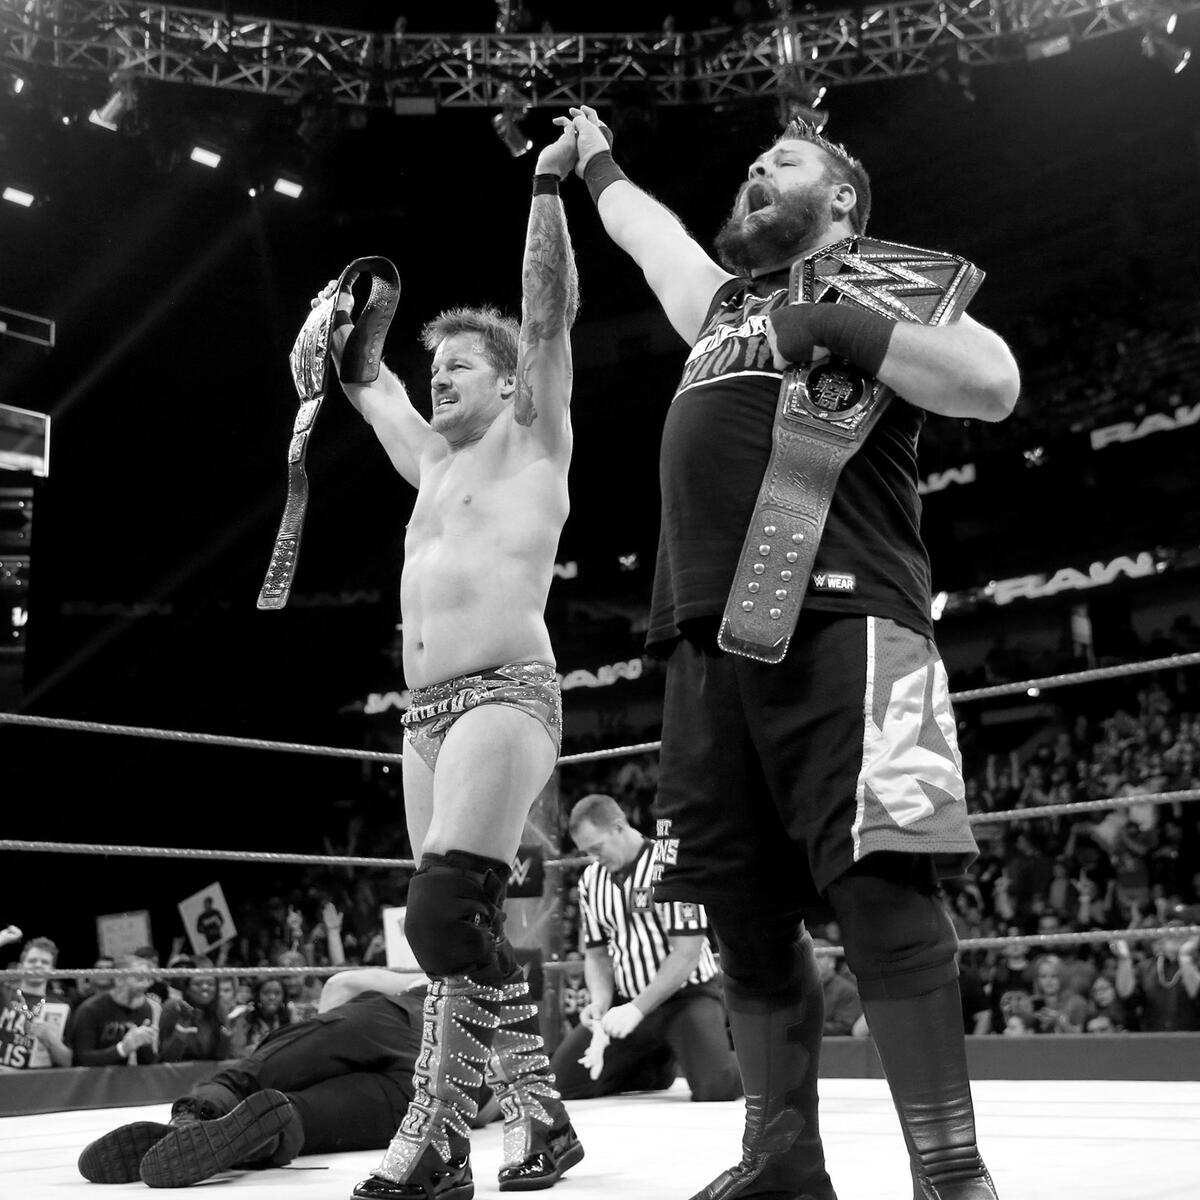 Jericho stands tall as the new U.S. Champion.